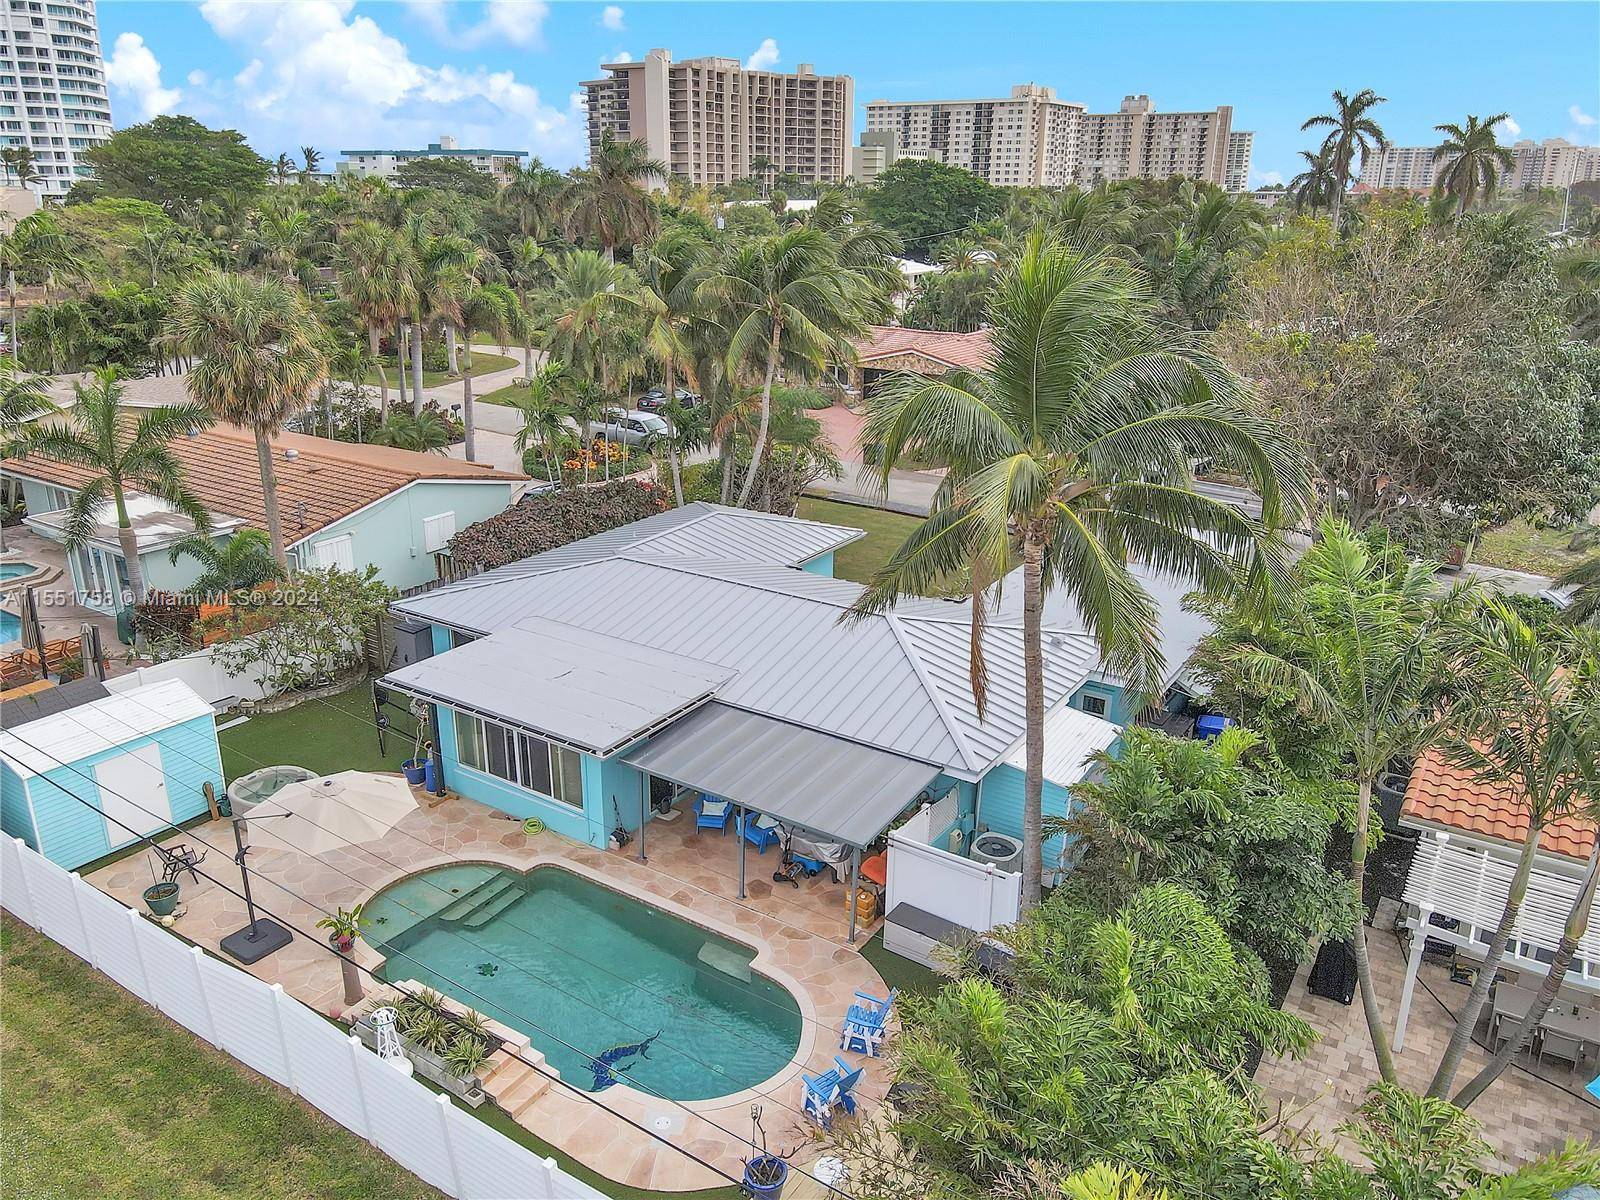 Spacious pool home in sought after Bel Air situated in charming beach town.